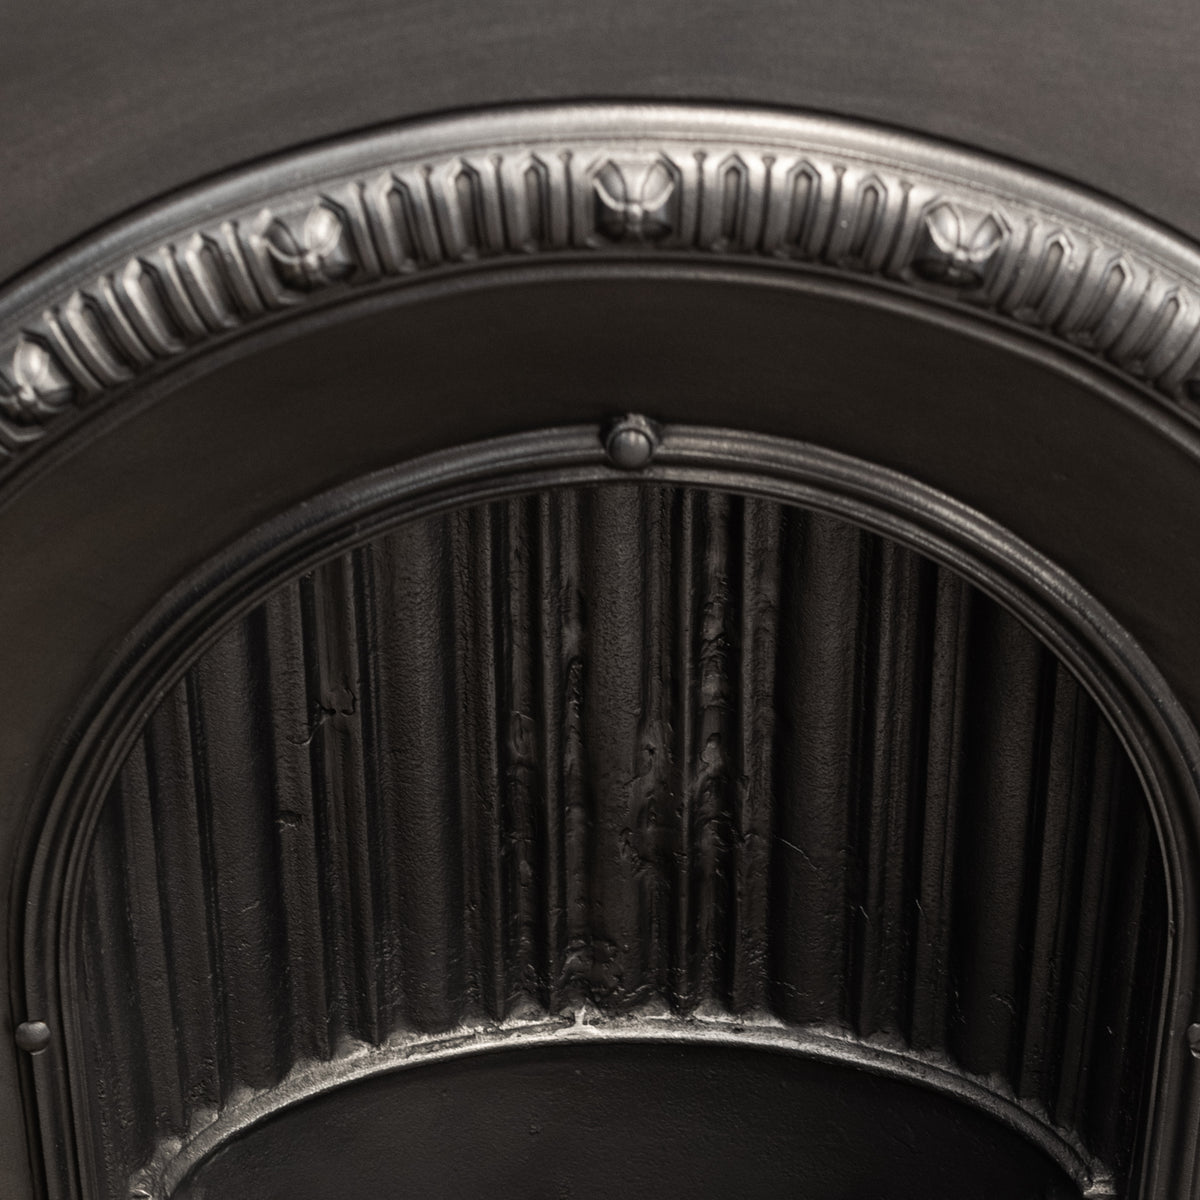 Antique Cast Iron Arched Fireplace Insert With Finials | The Architectural Forum